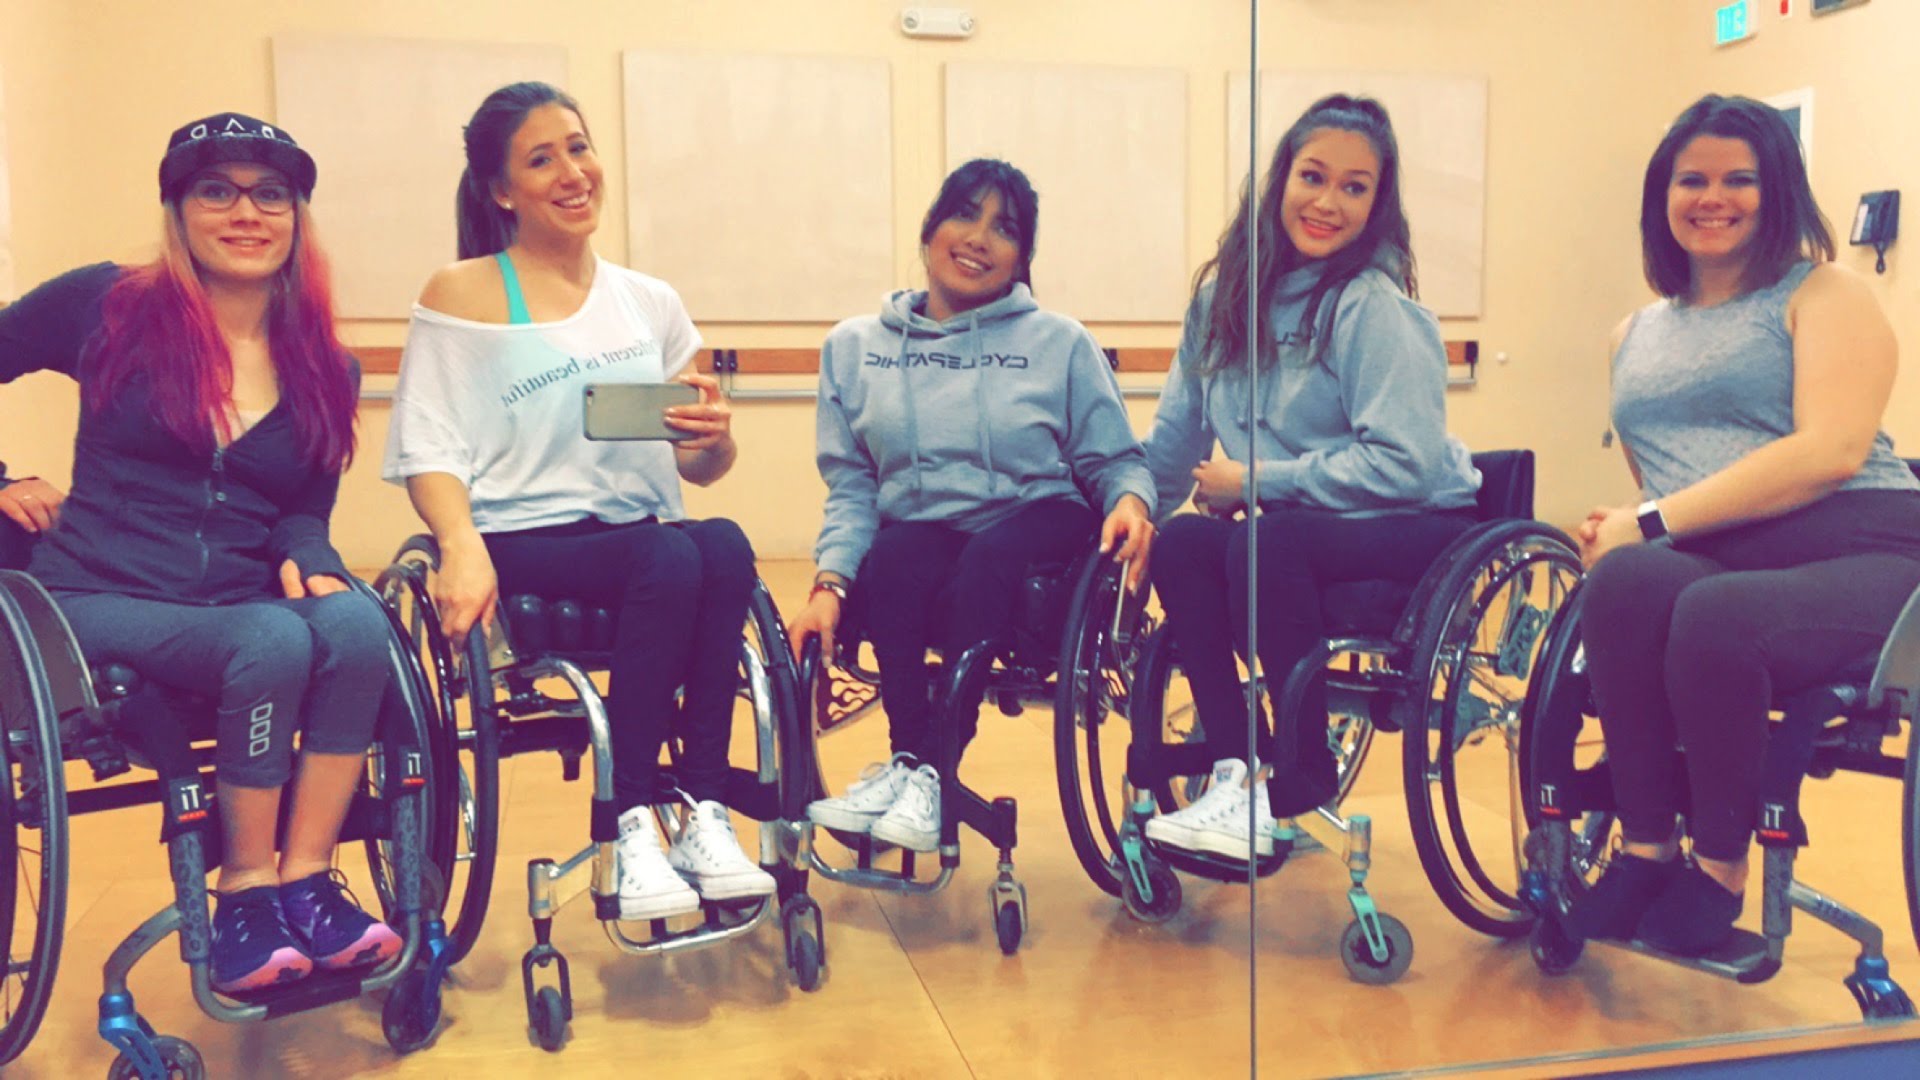 The Women in Wheelchairs Changing the World of Competitive Dance - Broadly